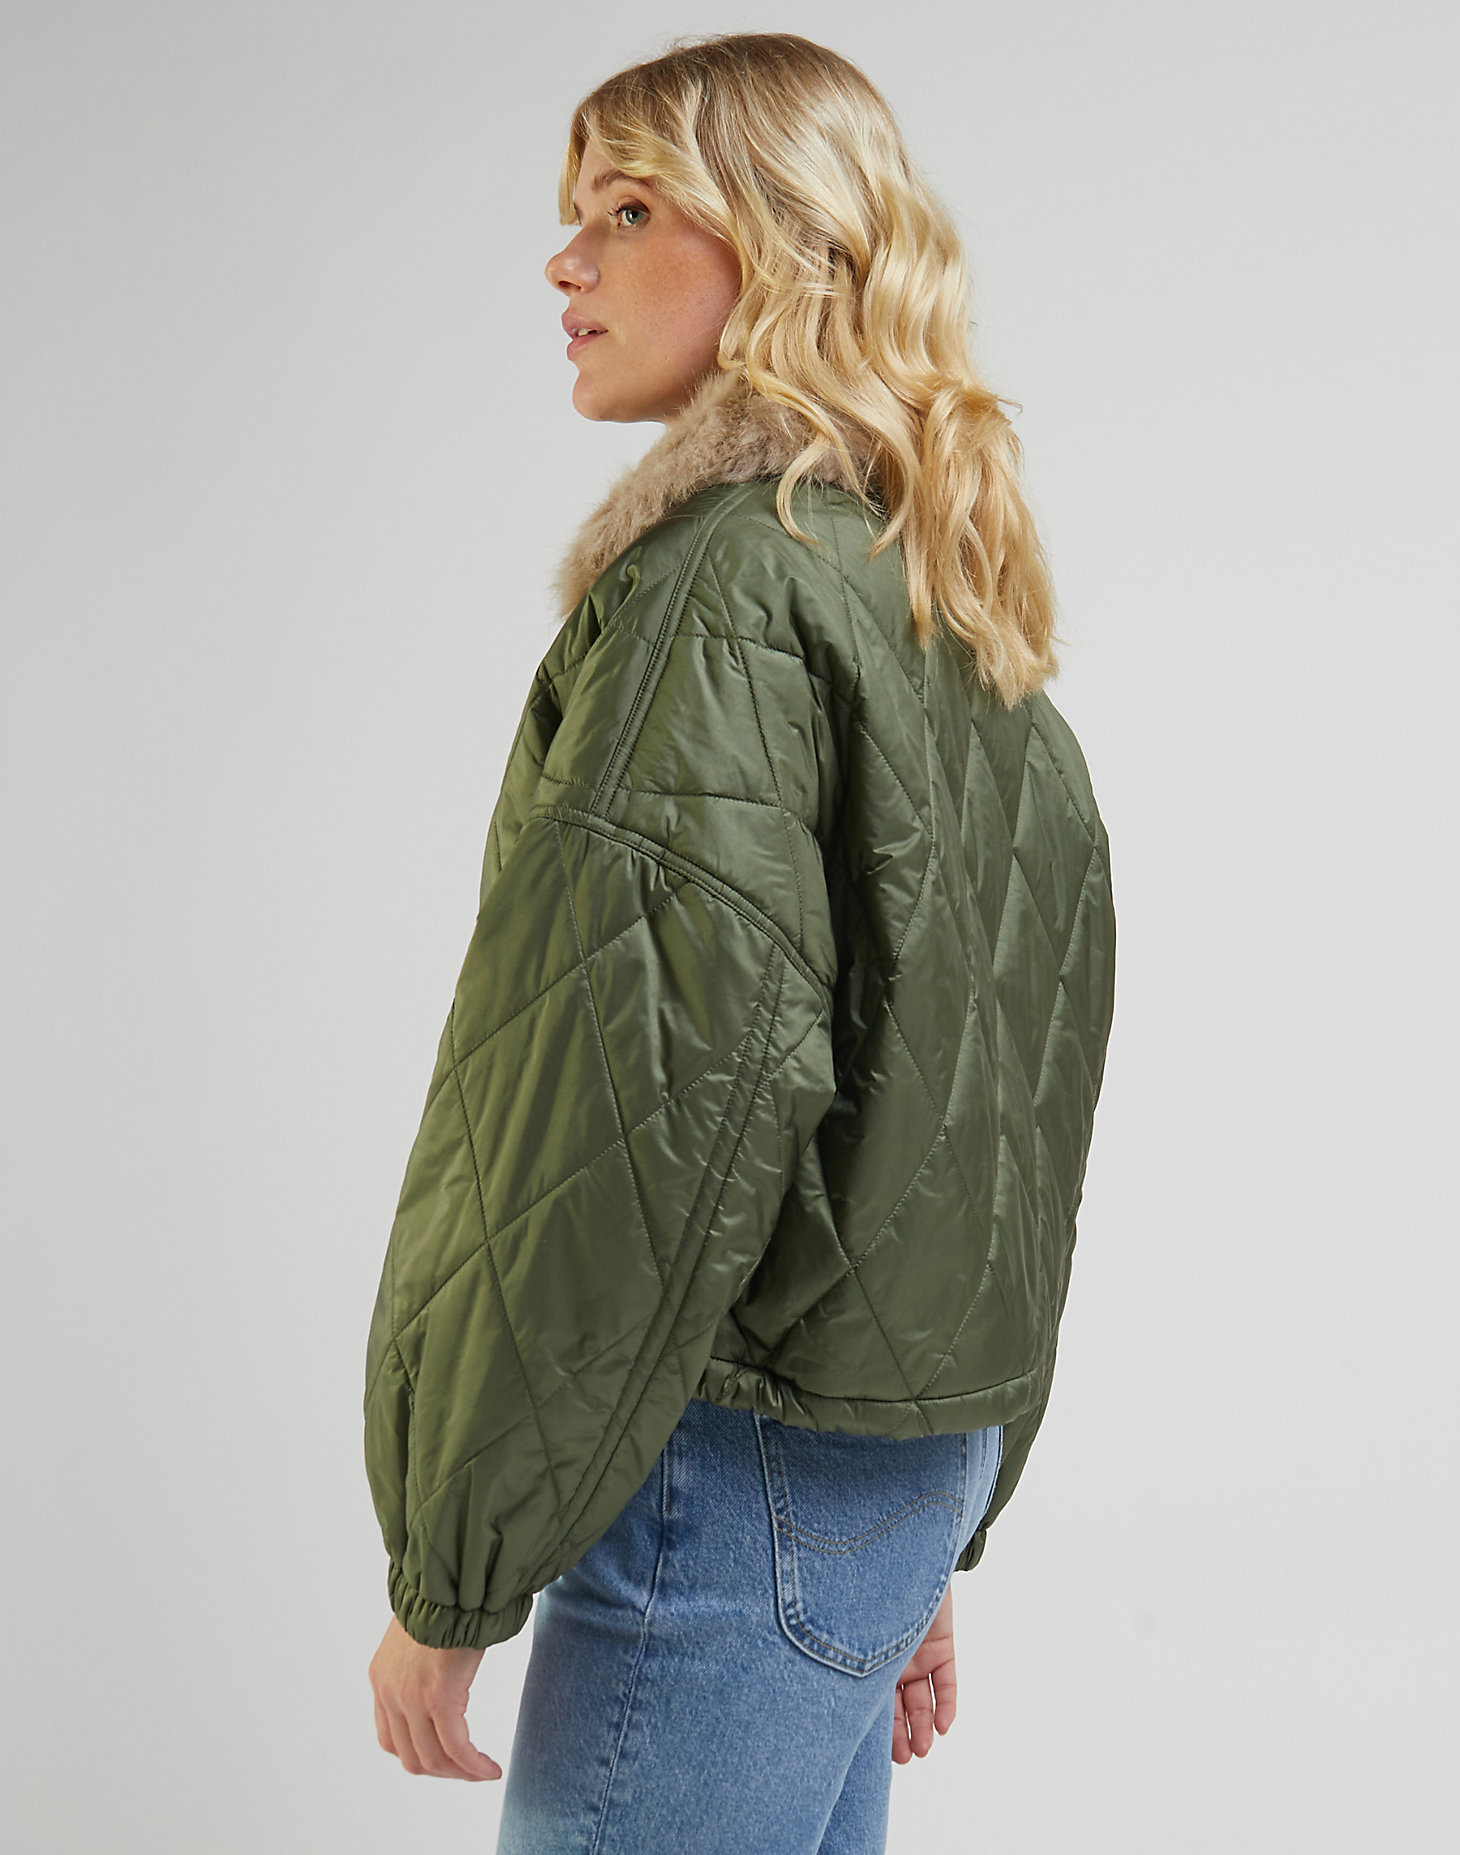 Trans Liner Jacket in Olive Grove alternative view 3